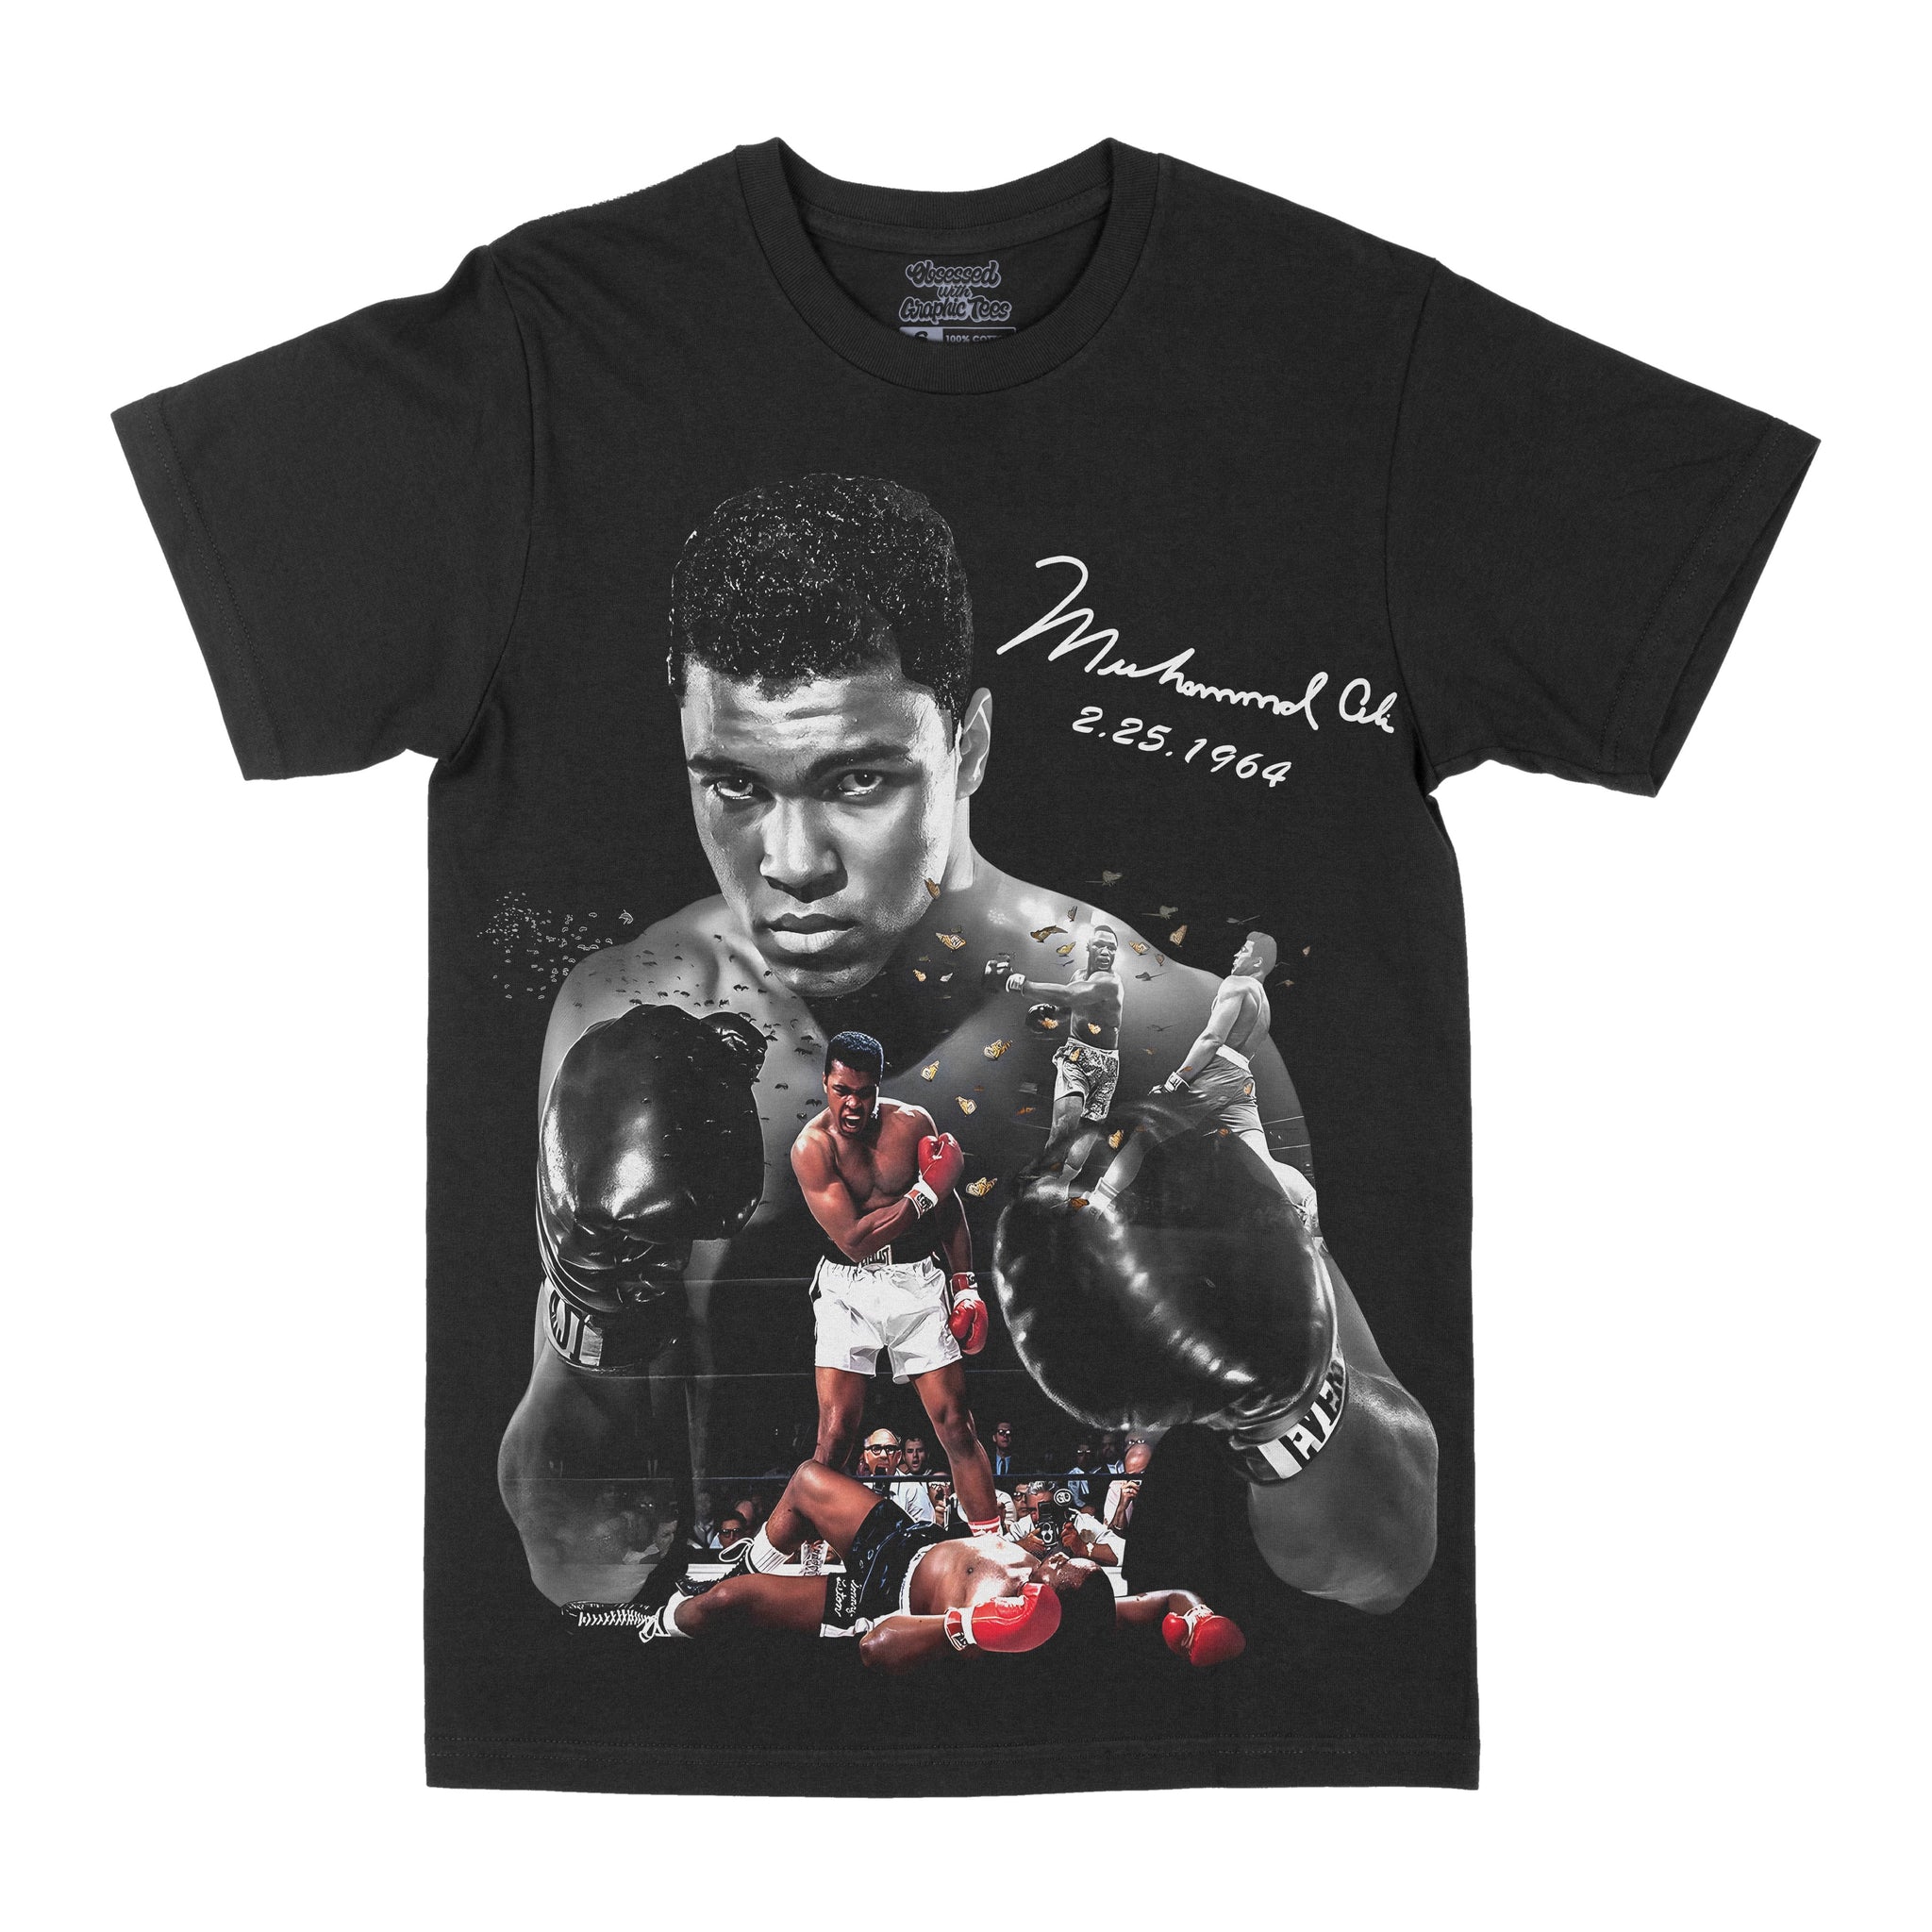 Muhammad Ali "Float Like A Butterfly" Graphic Tee